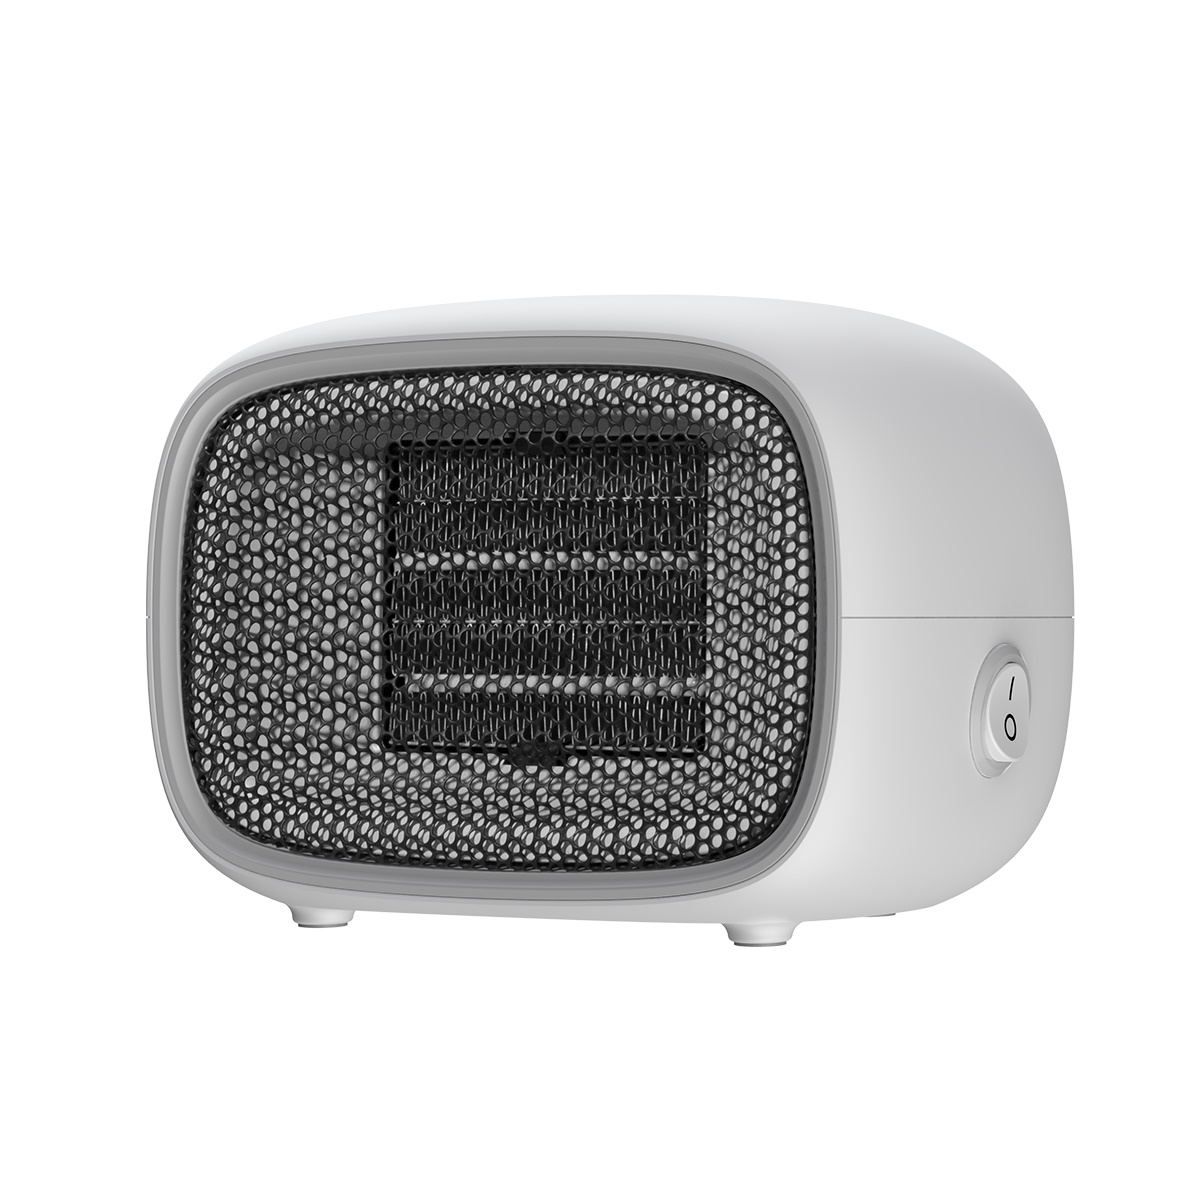 Baseus-Small-White-Car-Heater-Fan-Car-Small-Air-Conditioner-Small-Speed-Hot-Electric-Fan-1395409